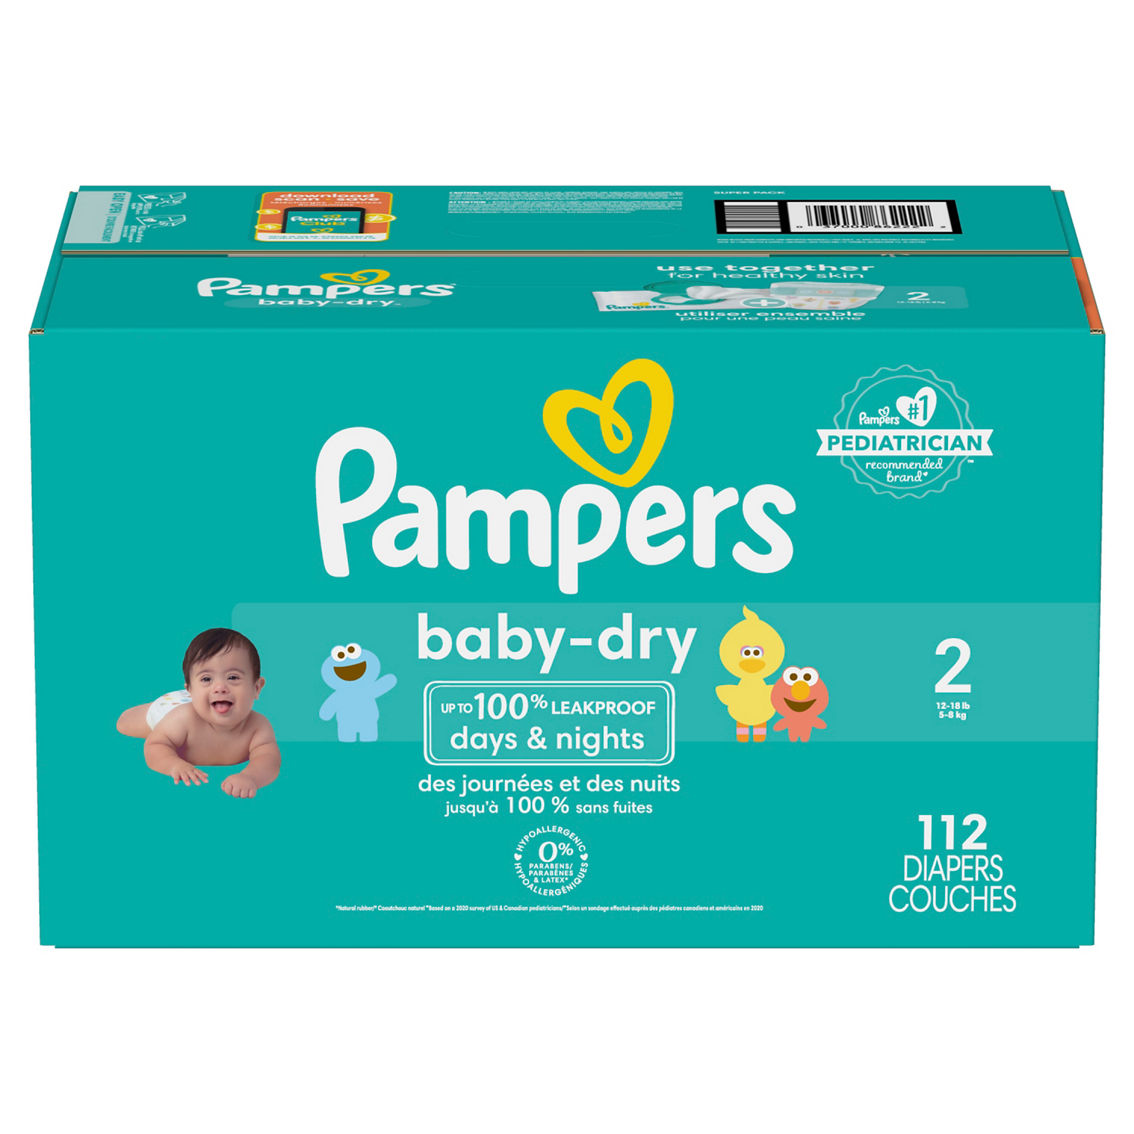 Pampers Baby Dry Super Pack Diapers Size 2 (12-18 lb.), 112 Ct. - Image 2 of 2